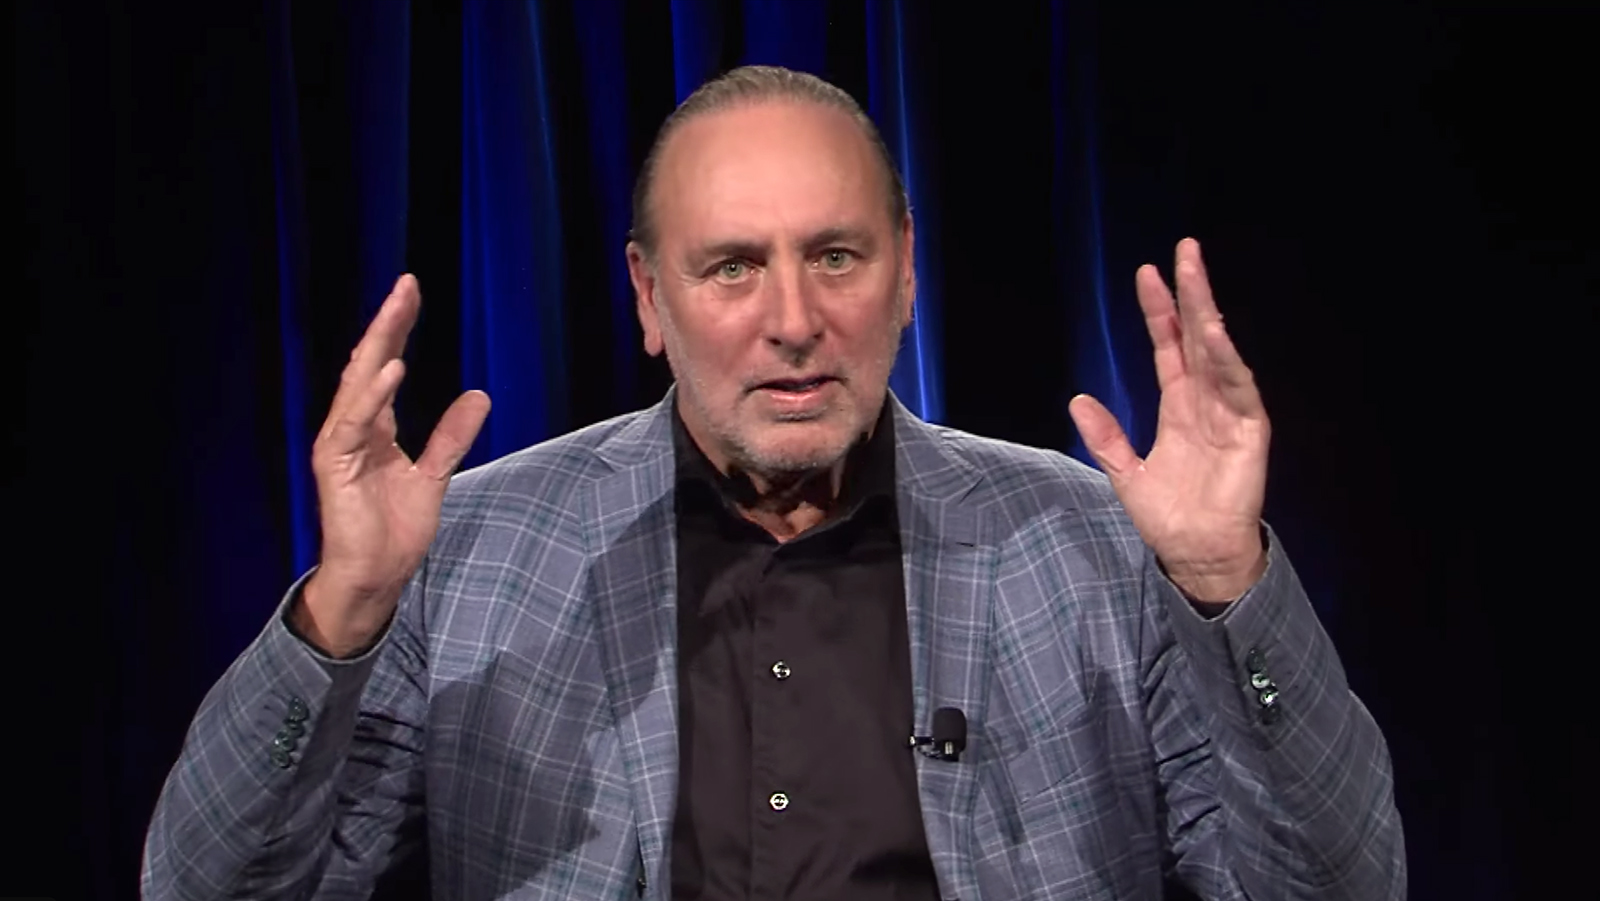 Brian Houston addresses his resignation from Hillsong Church in a video released Nov. 3, 2022. Video screen grab